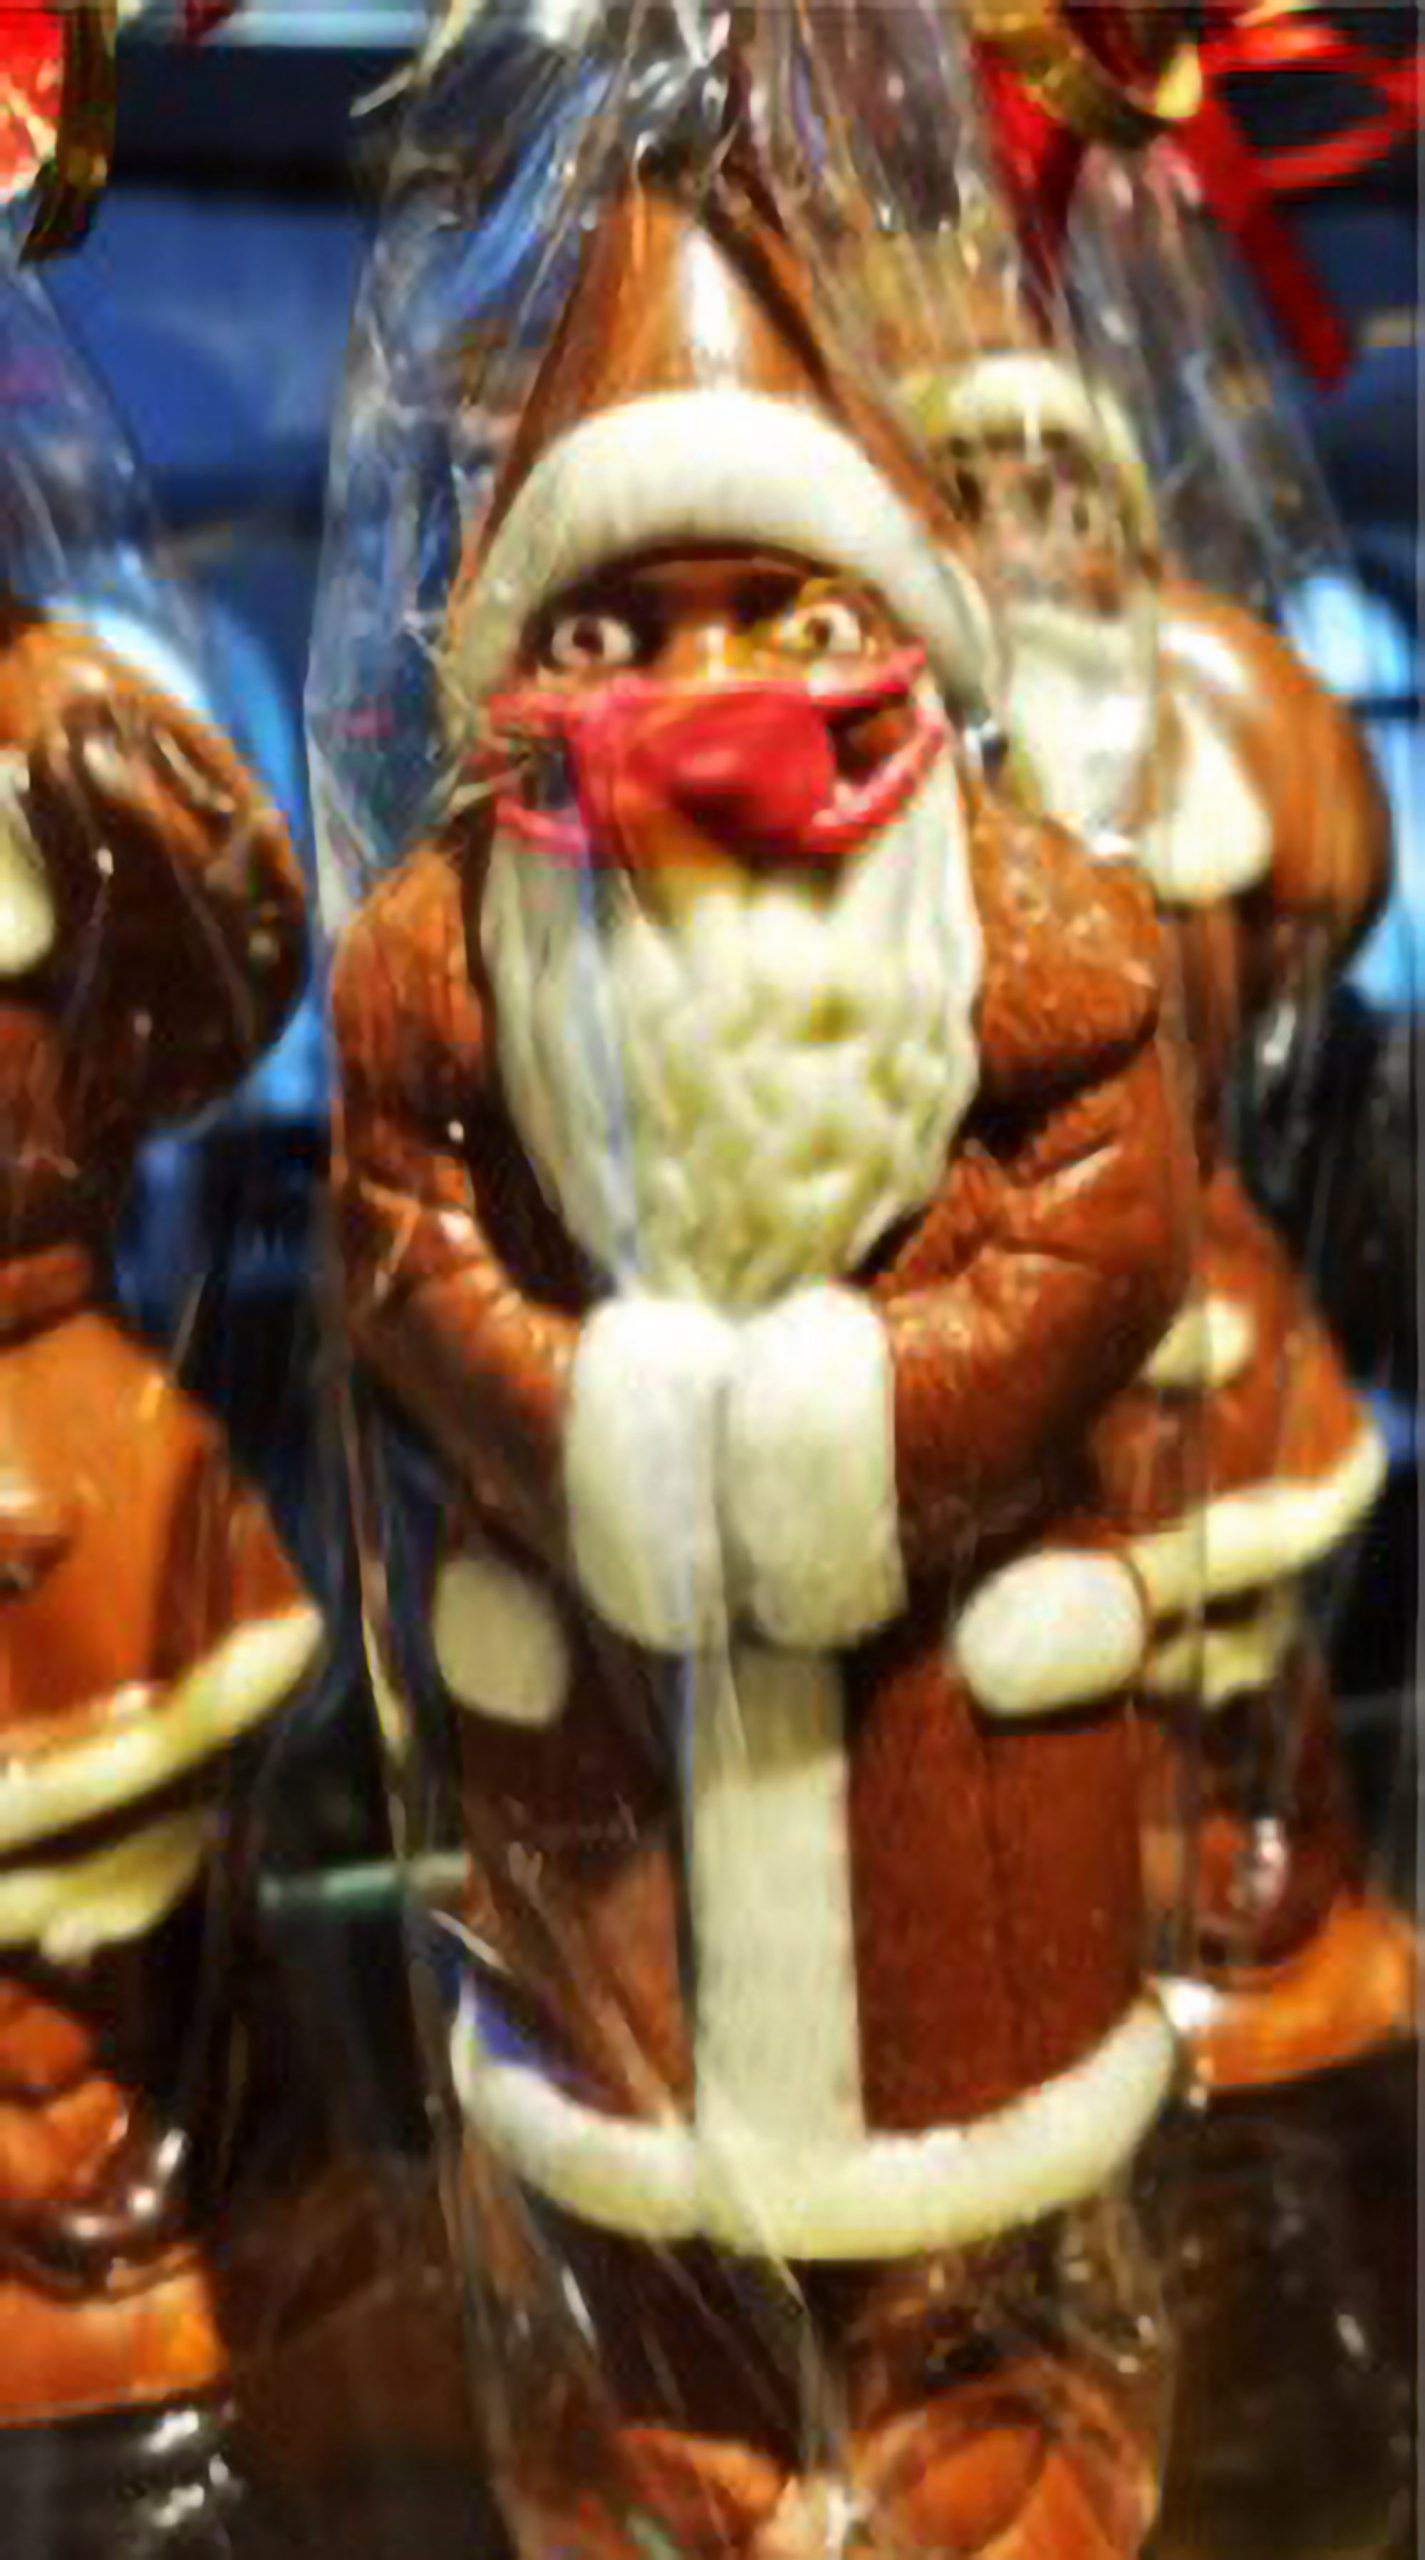 Read more about the article Hate Mail For Bakery After Producing Mask-Wearing Choccy Santas